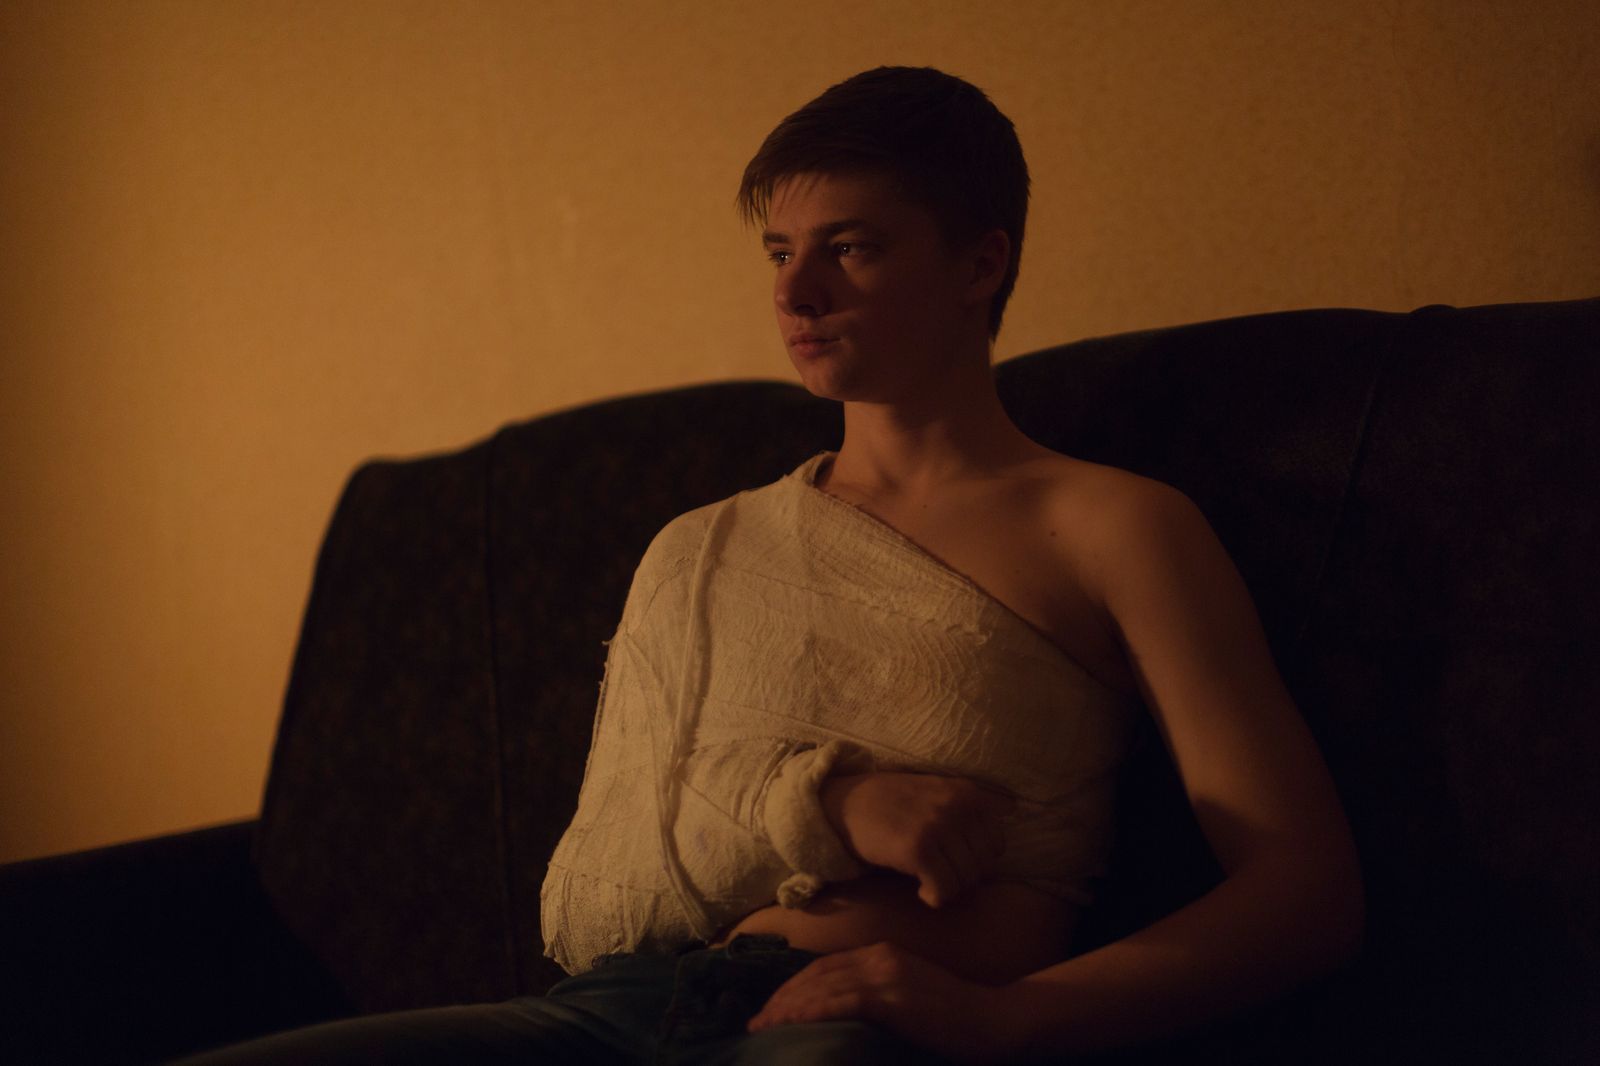 © Kyrre Lien - Nikita, a student in Donetsk a late night. He got in a fight on New Years Eve, which didn't end well.